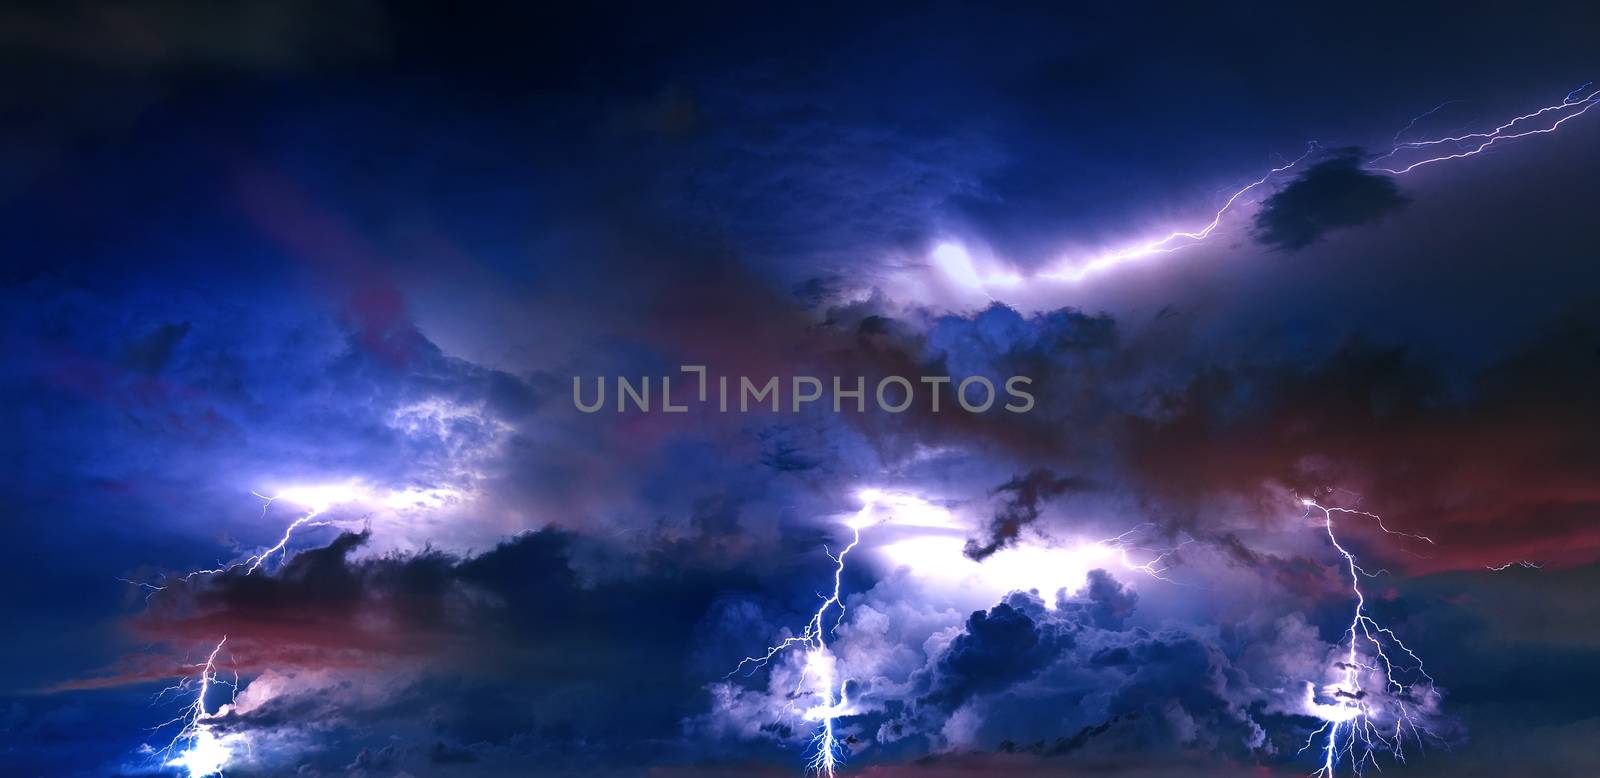 Thunderstorm clouds with lightning at night.